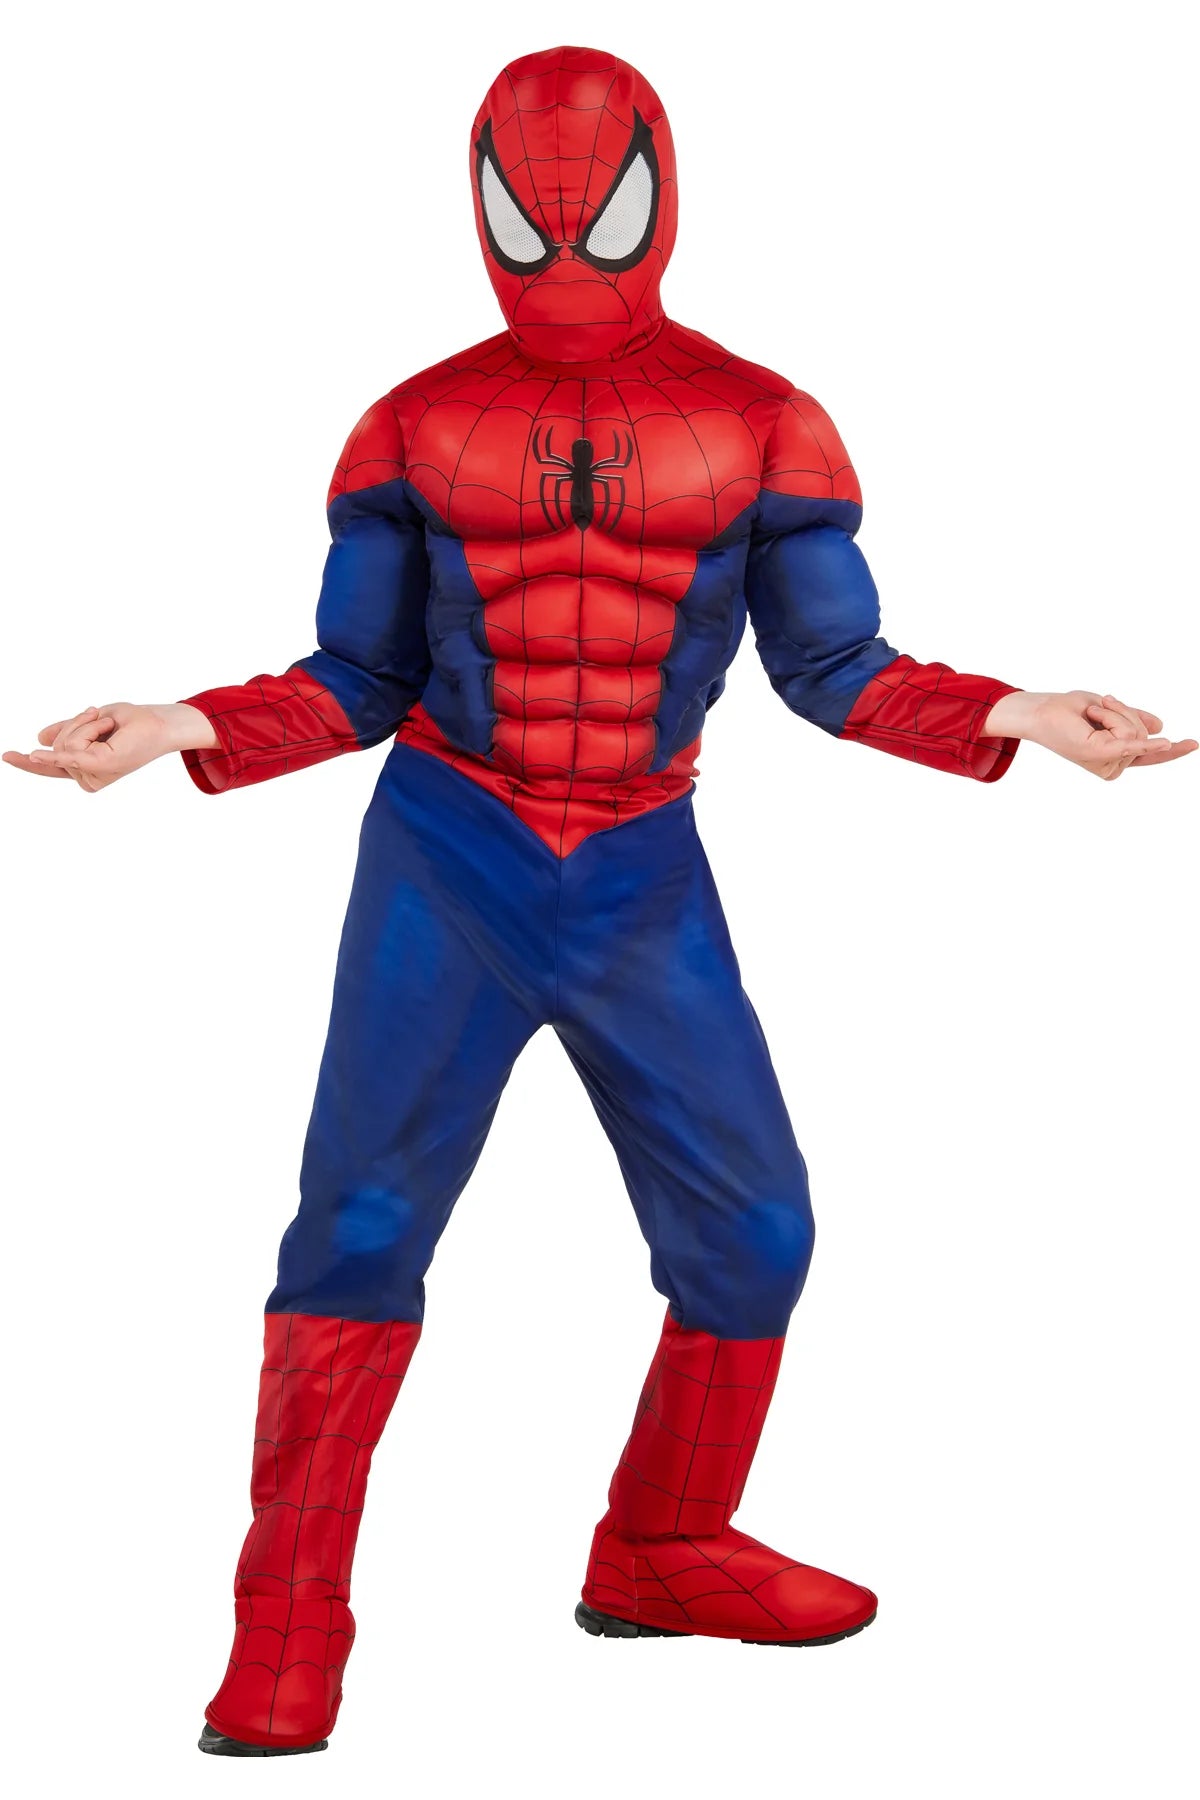 Boy's Spider-Man Muscle Costume